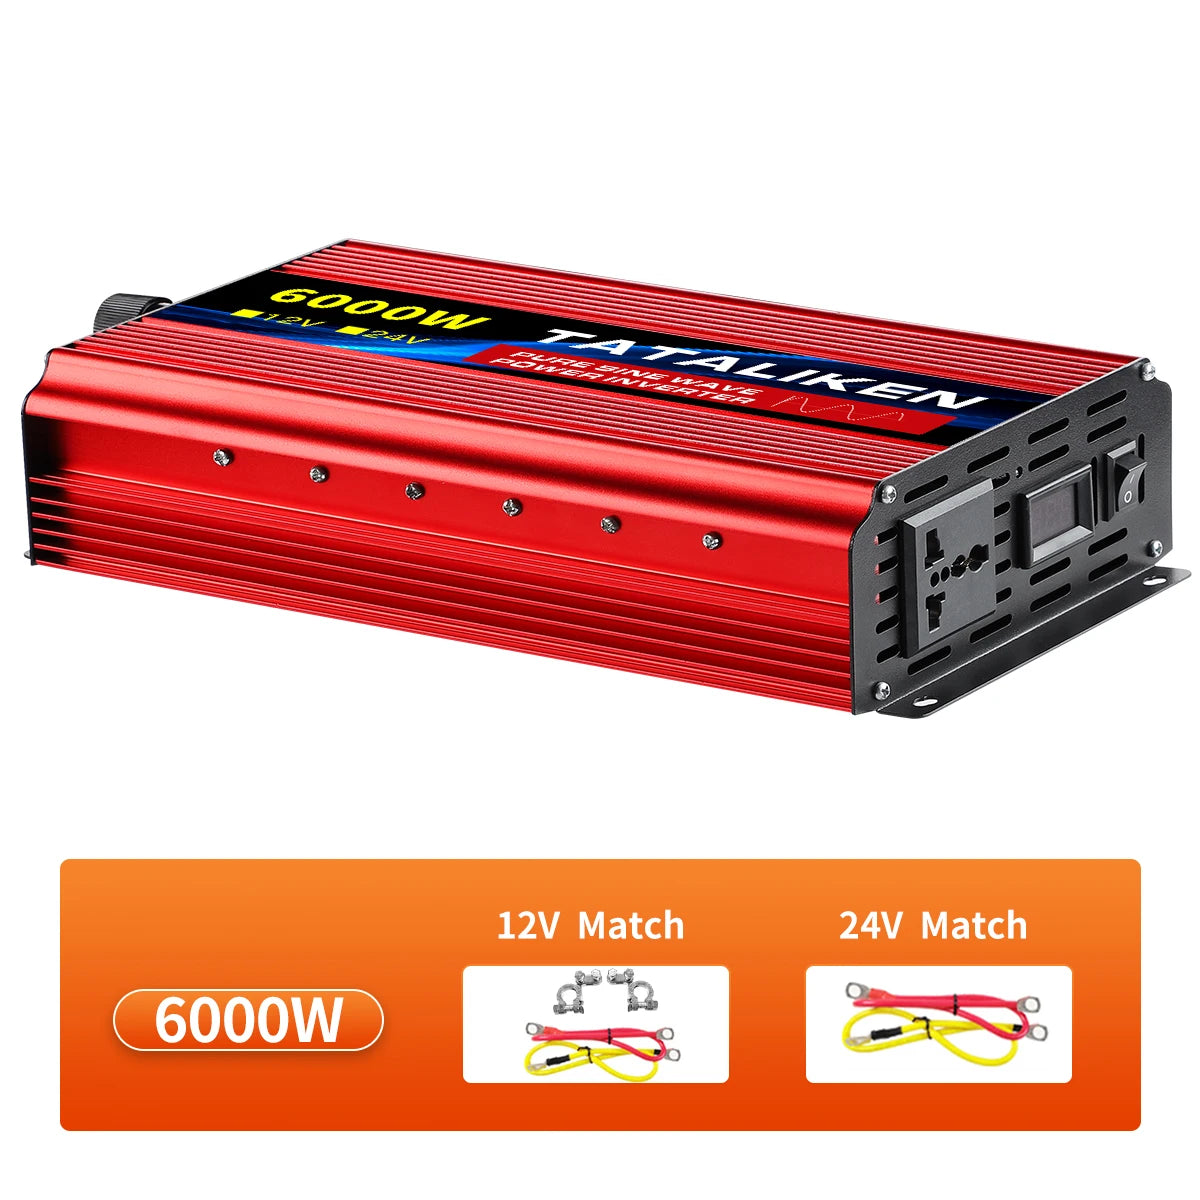 DC/AC Inverter Specifications: Power, Frequency, and Current Details for Mainland China-made Tataliken Products.